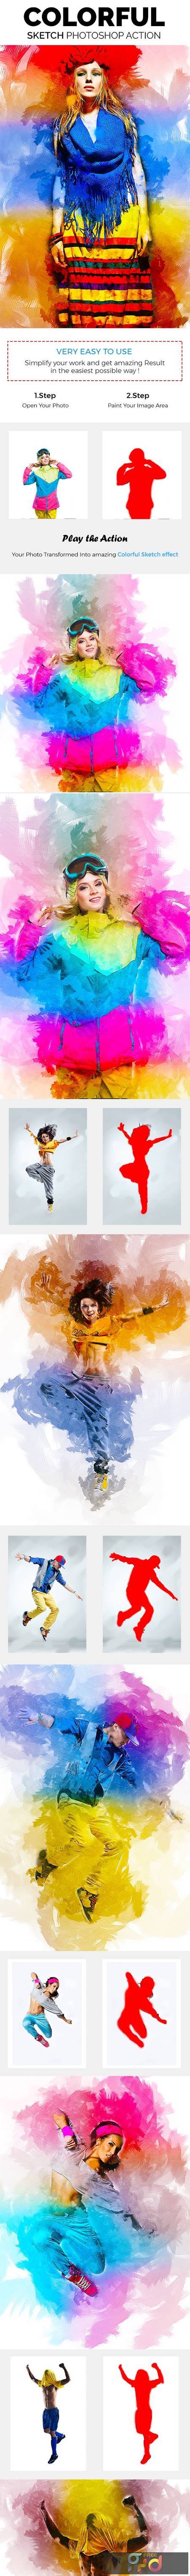 Colorful Sketch Photoshop Action